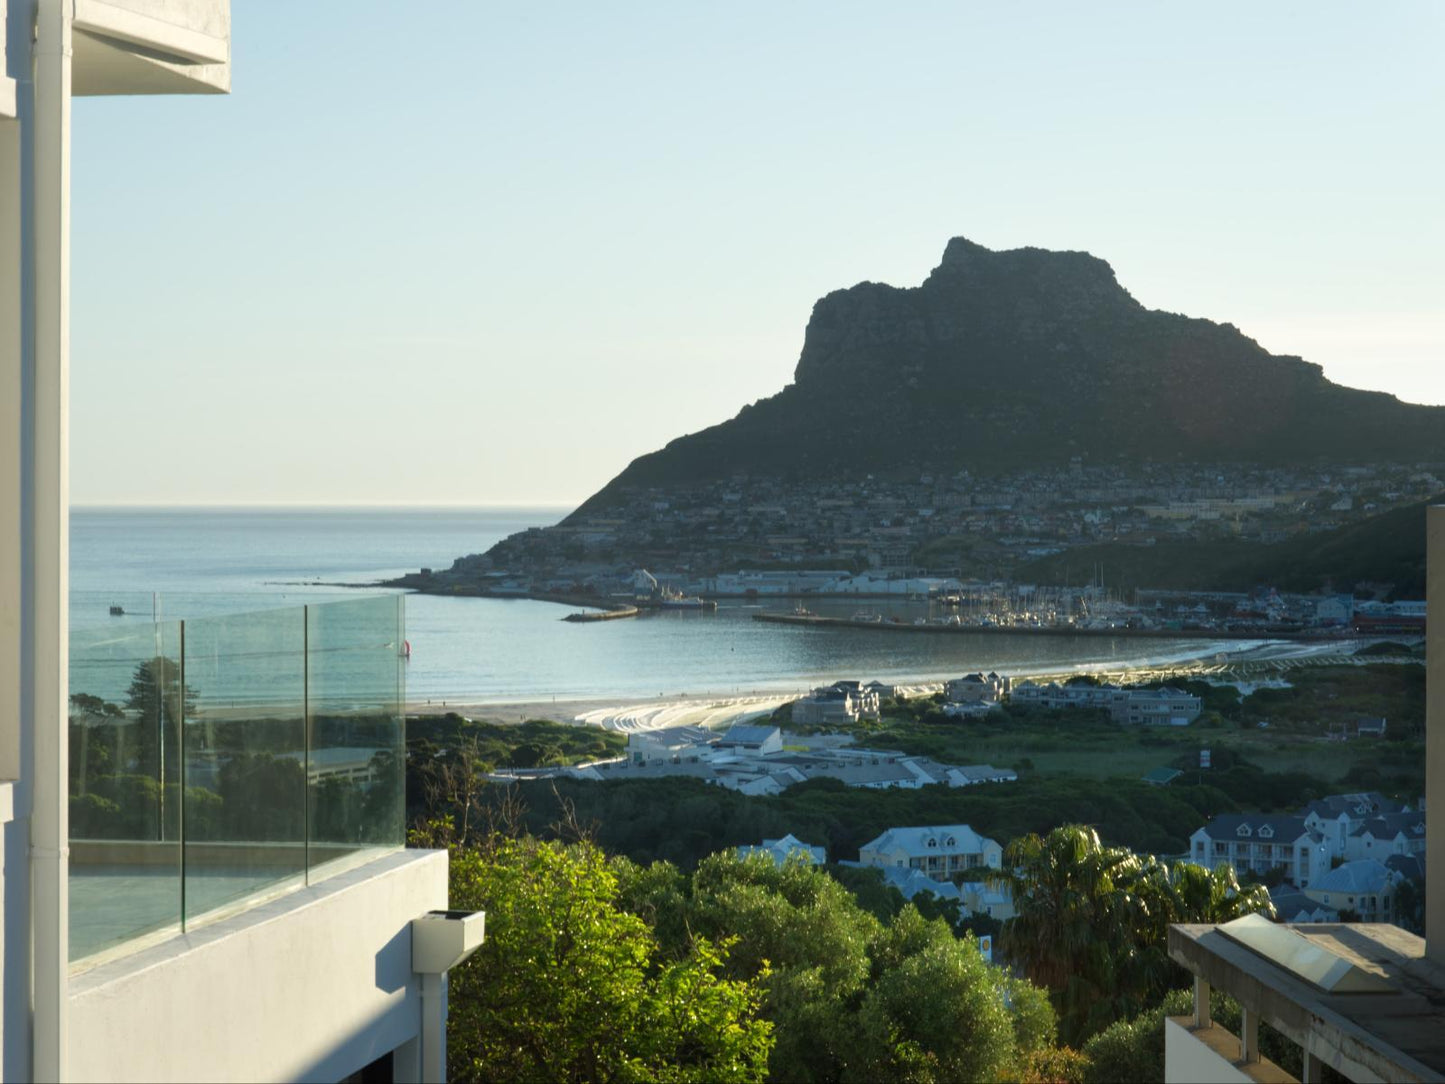 Deluxe King or Twin Room Mountain View @ Hout Bay View